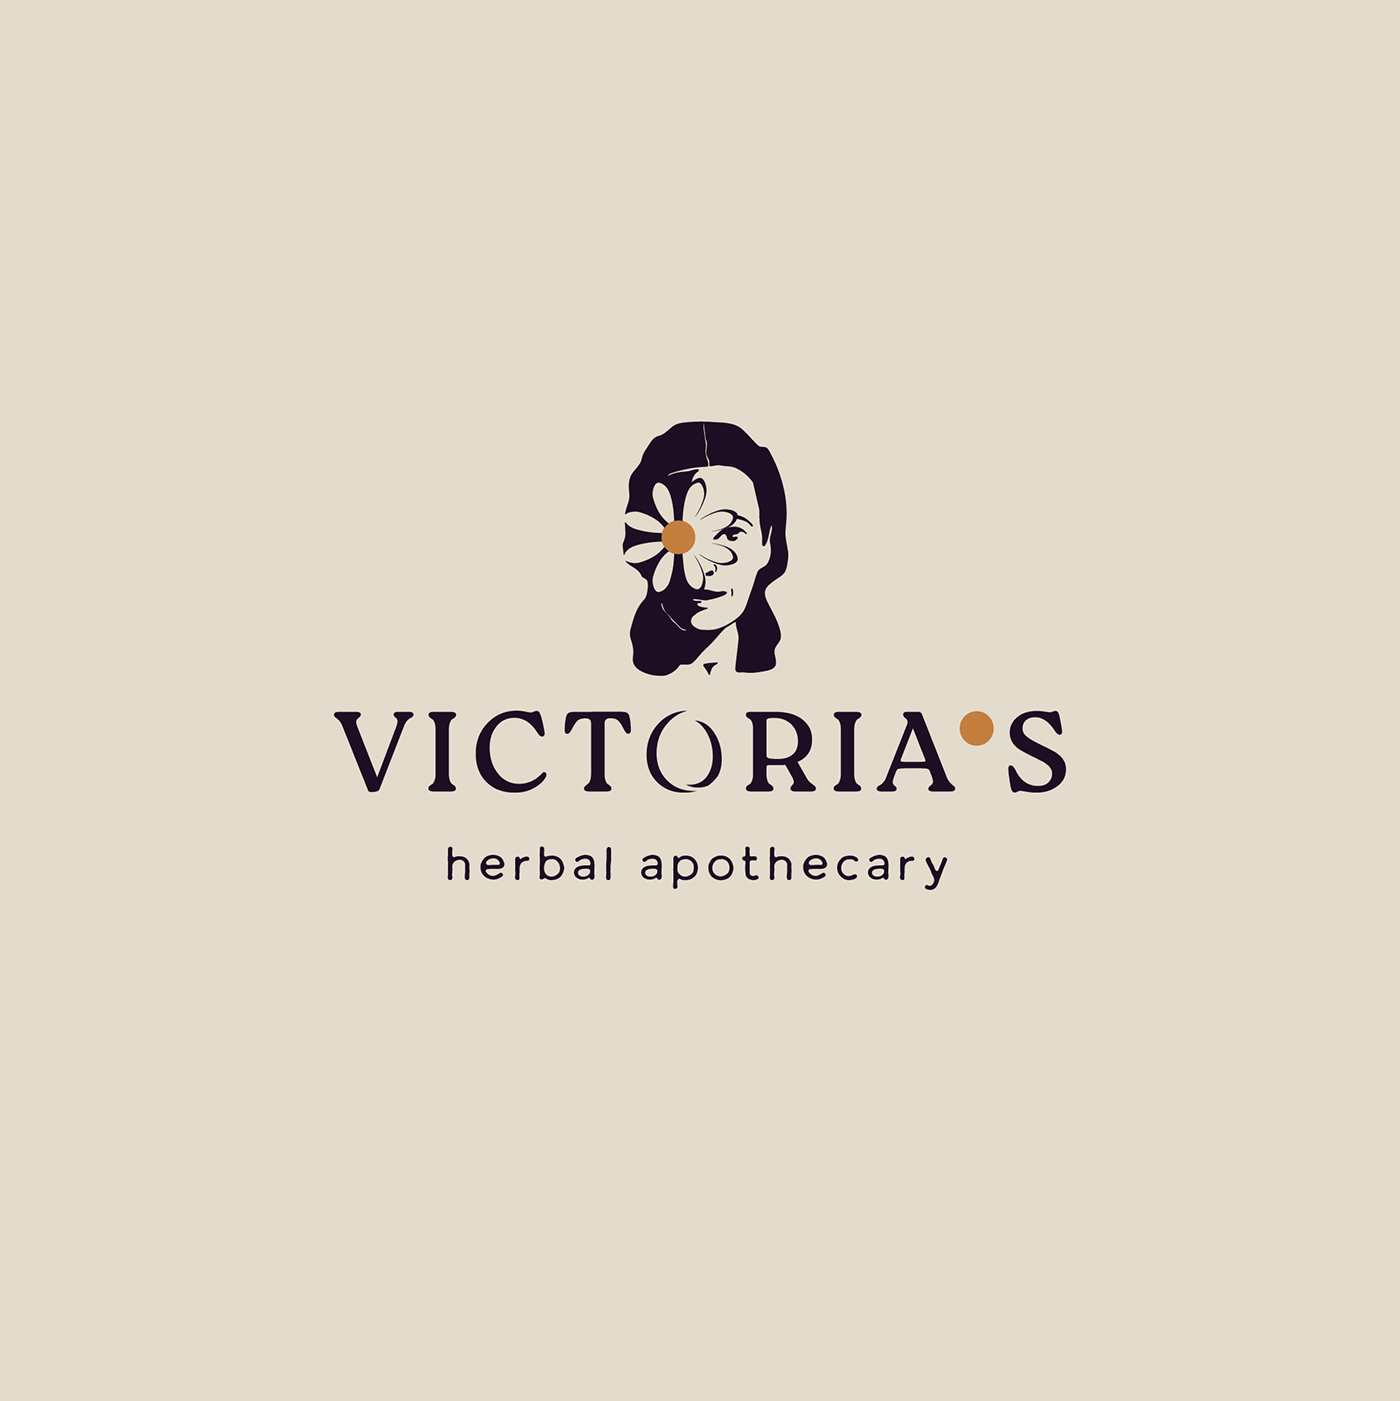 A logotype for a herbal apothecary